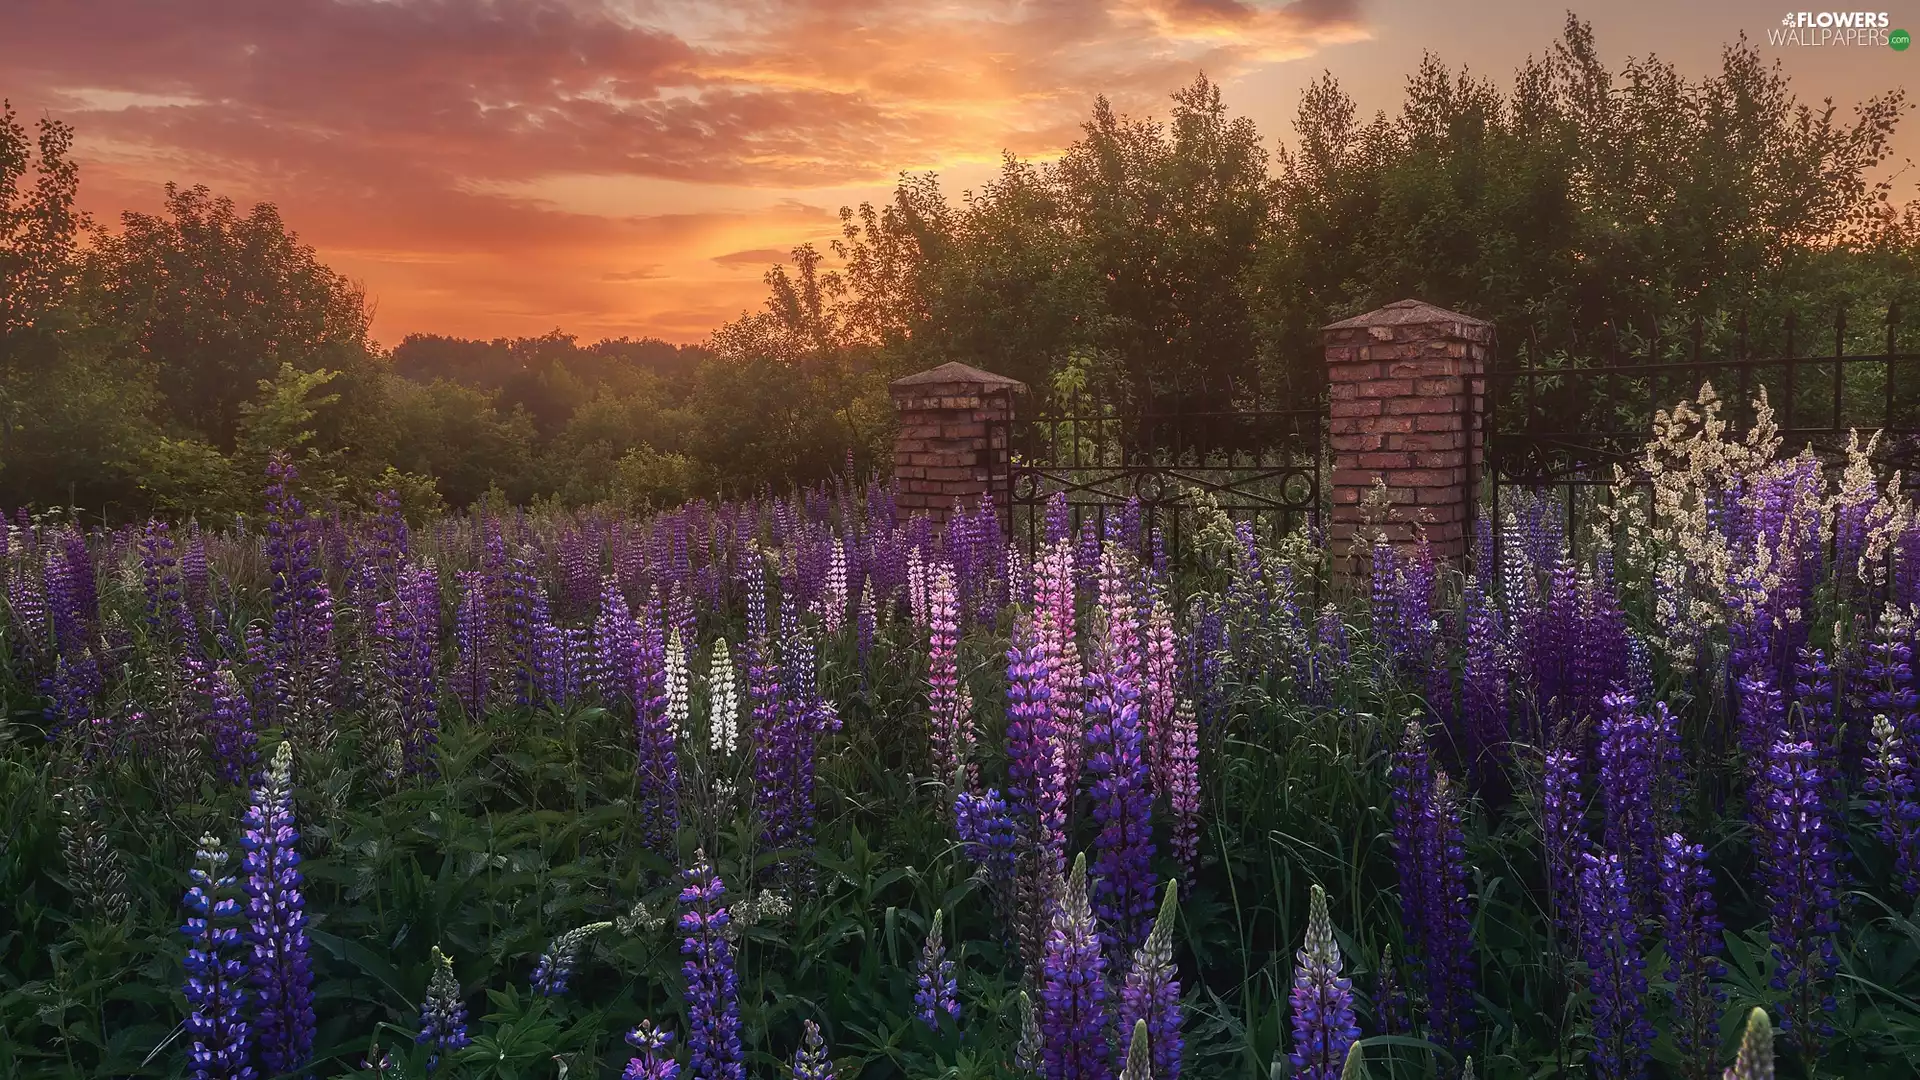 lupine, Meadow, trees, Flowers, Great Sunsets, fence, viewes